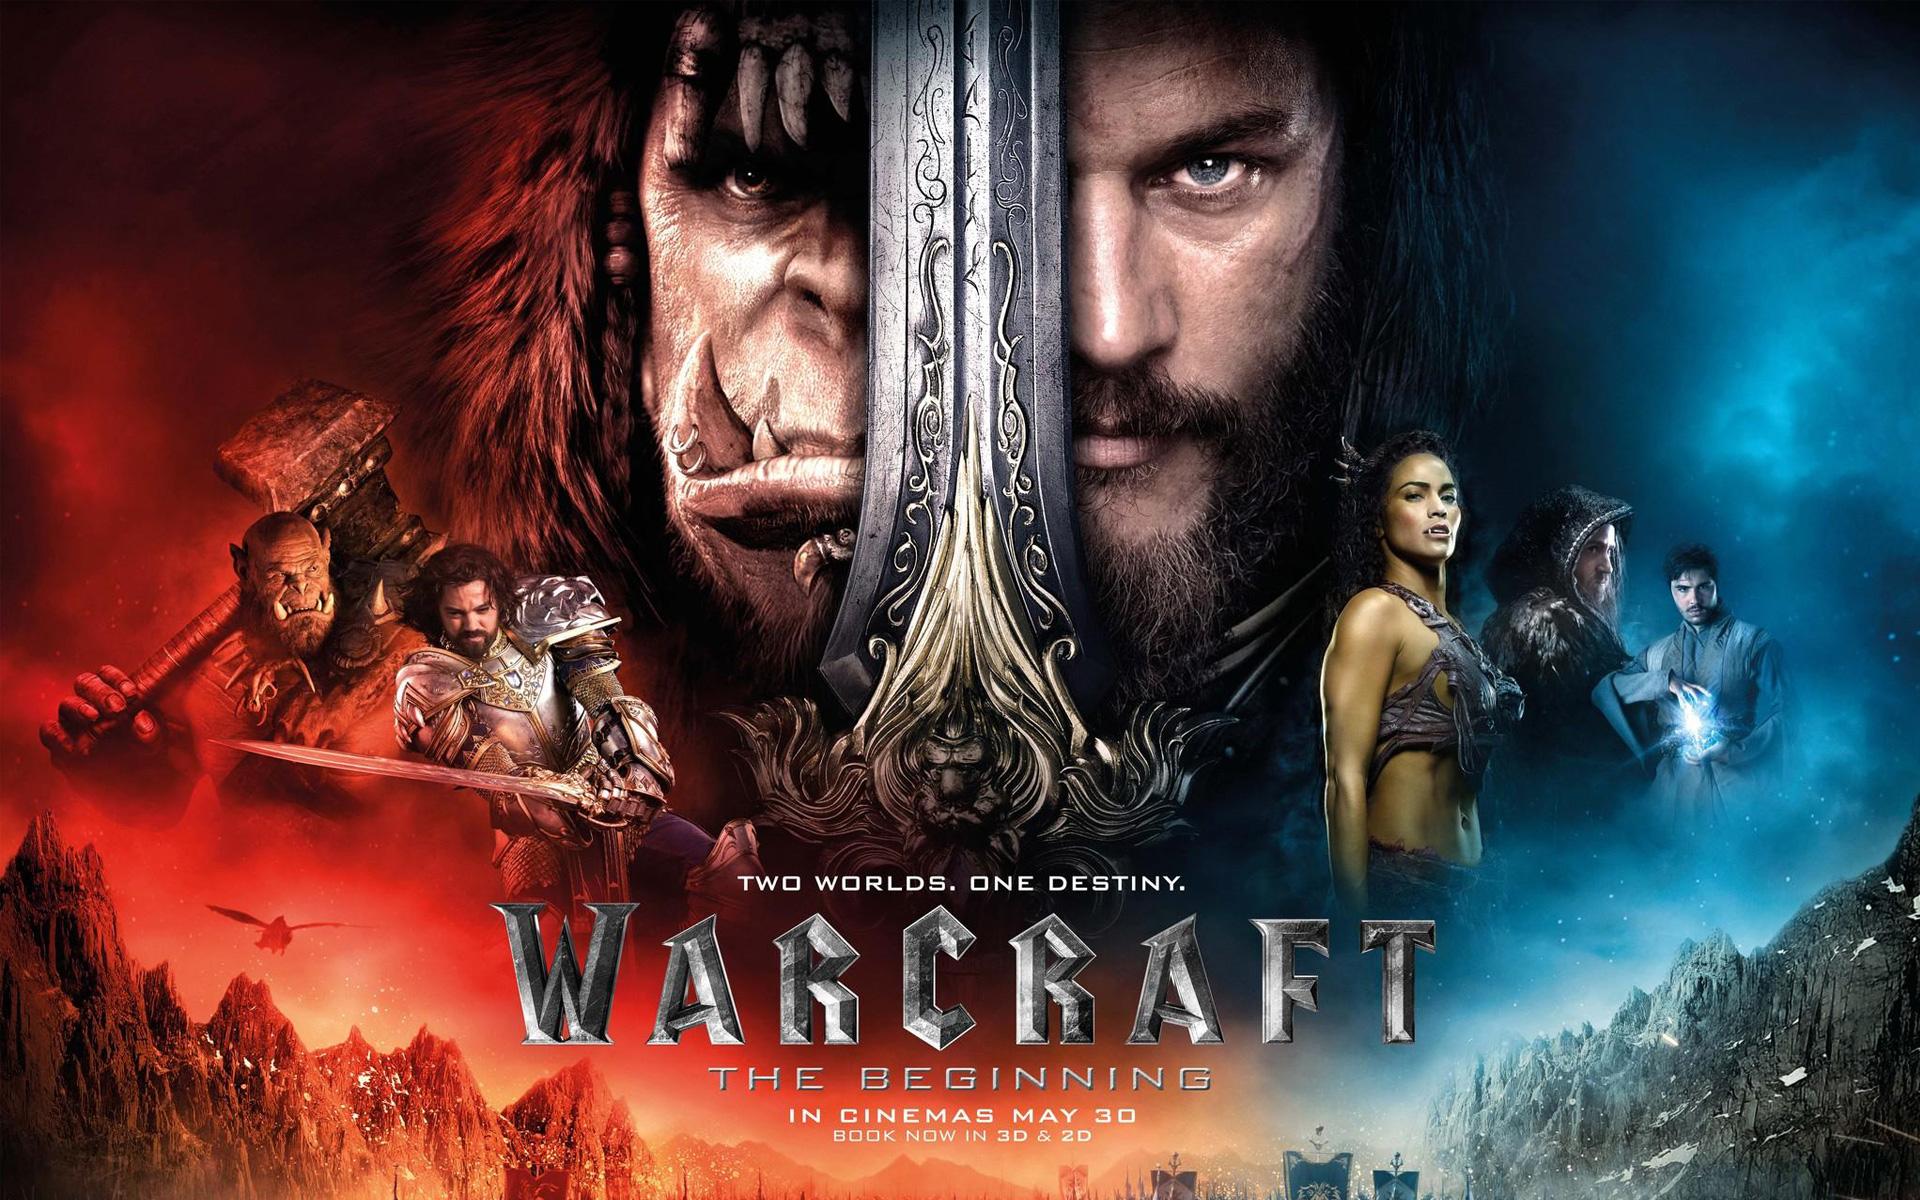 Digital goodies make the Warcraft movie more enticing